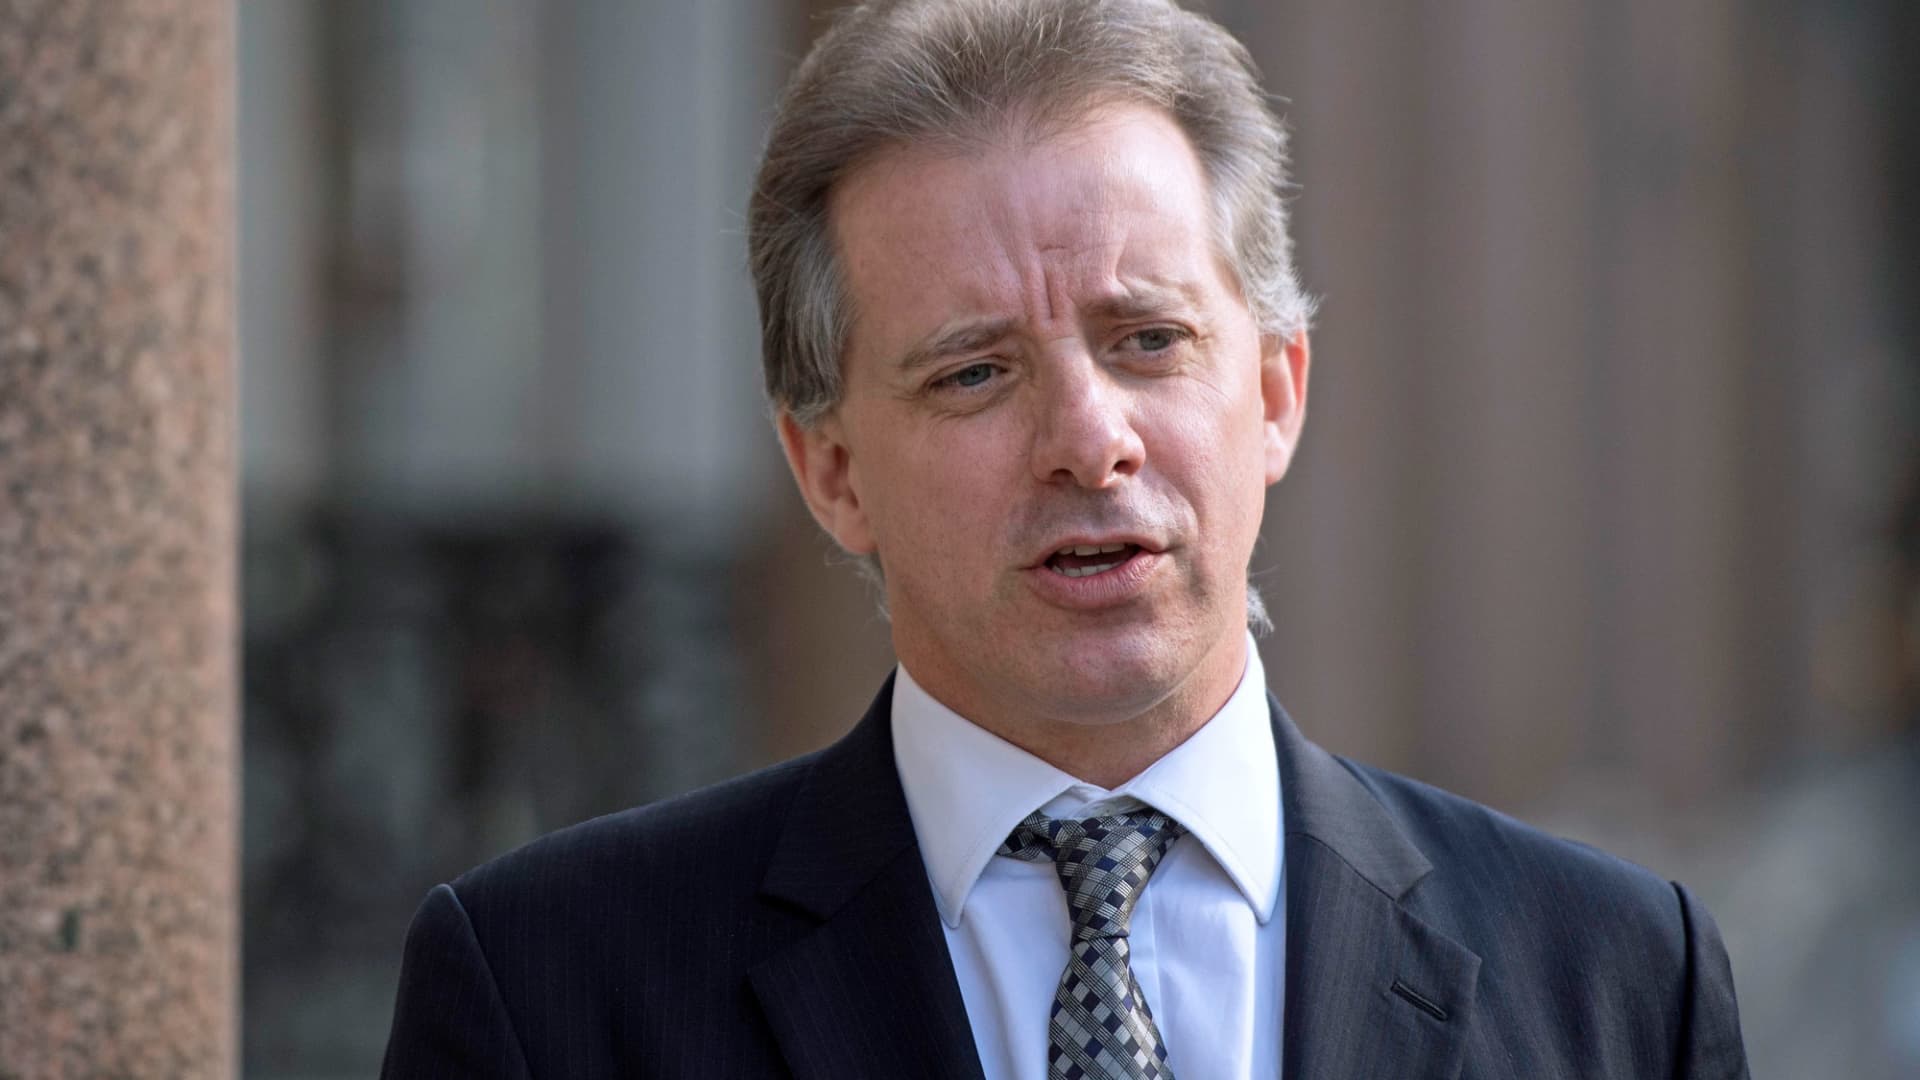 Christopher Steele, the former MI6 agent in London where he speaks to the media for the first time, March 7, 2017.